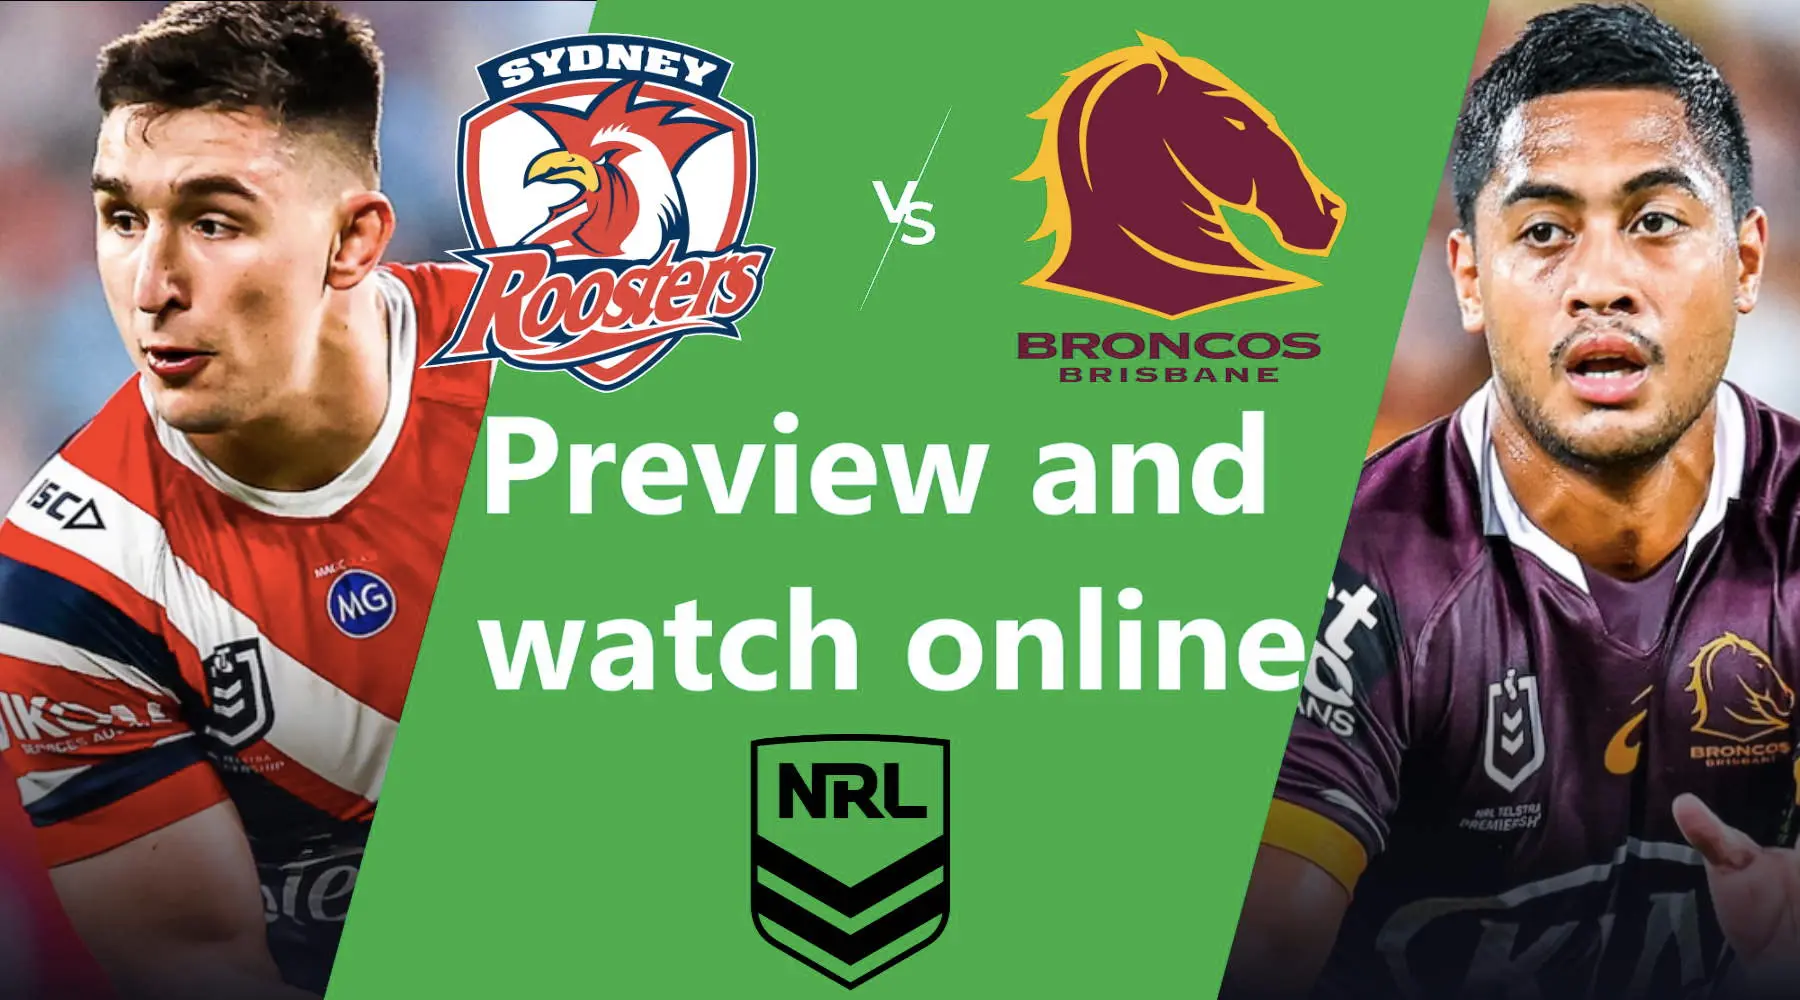 Watch Roosters vs Broncos NRL live and match preview